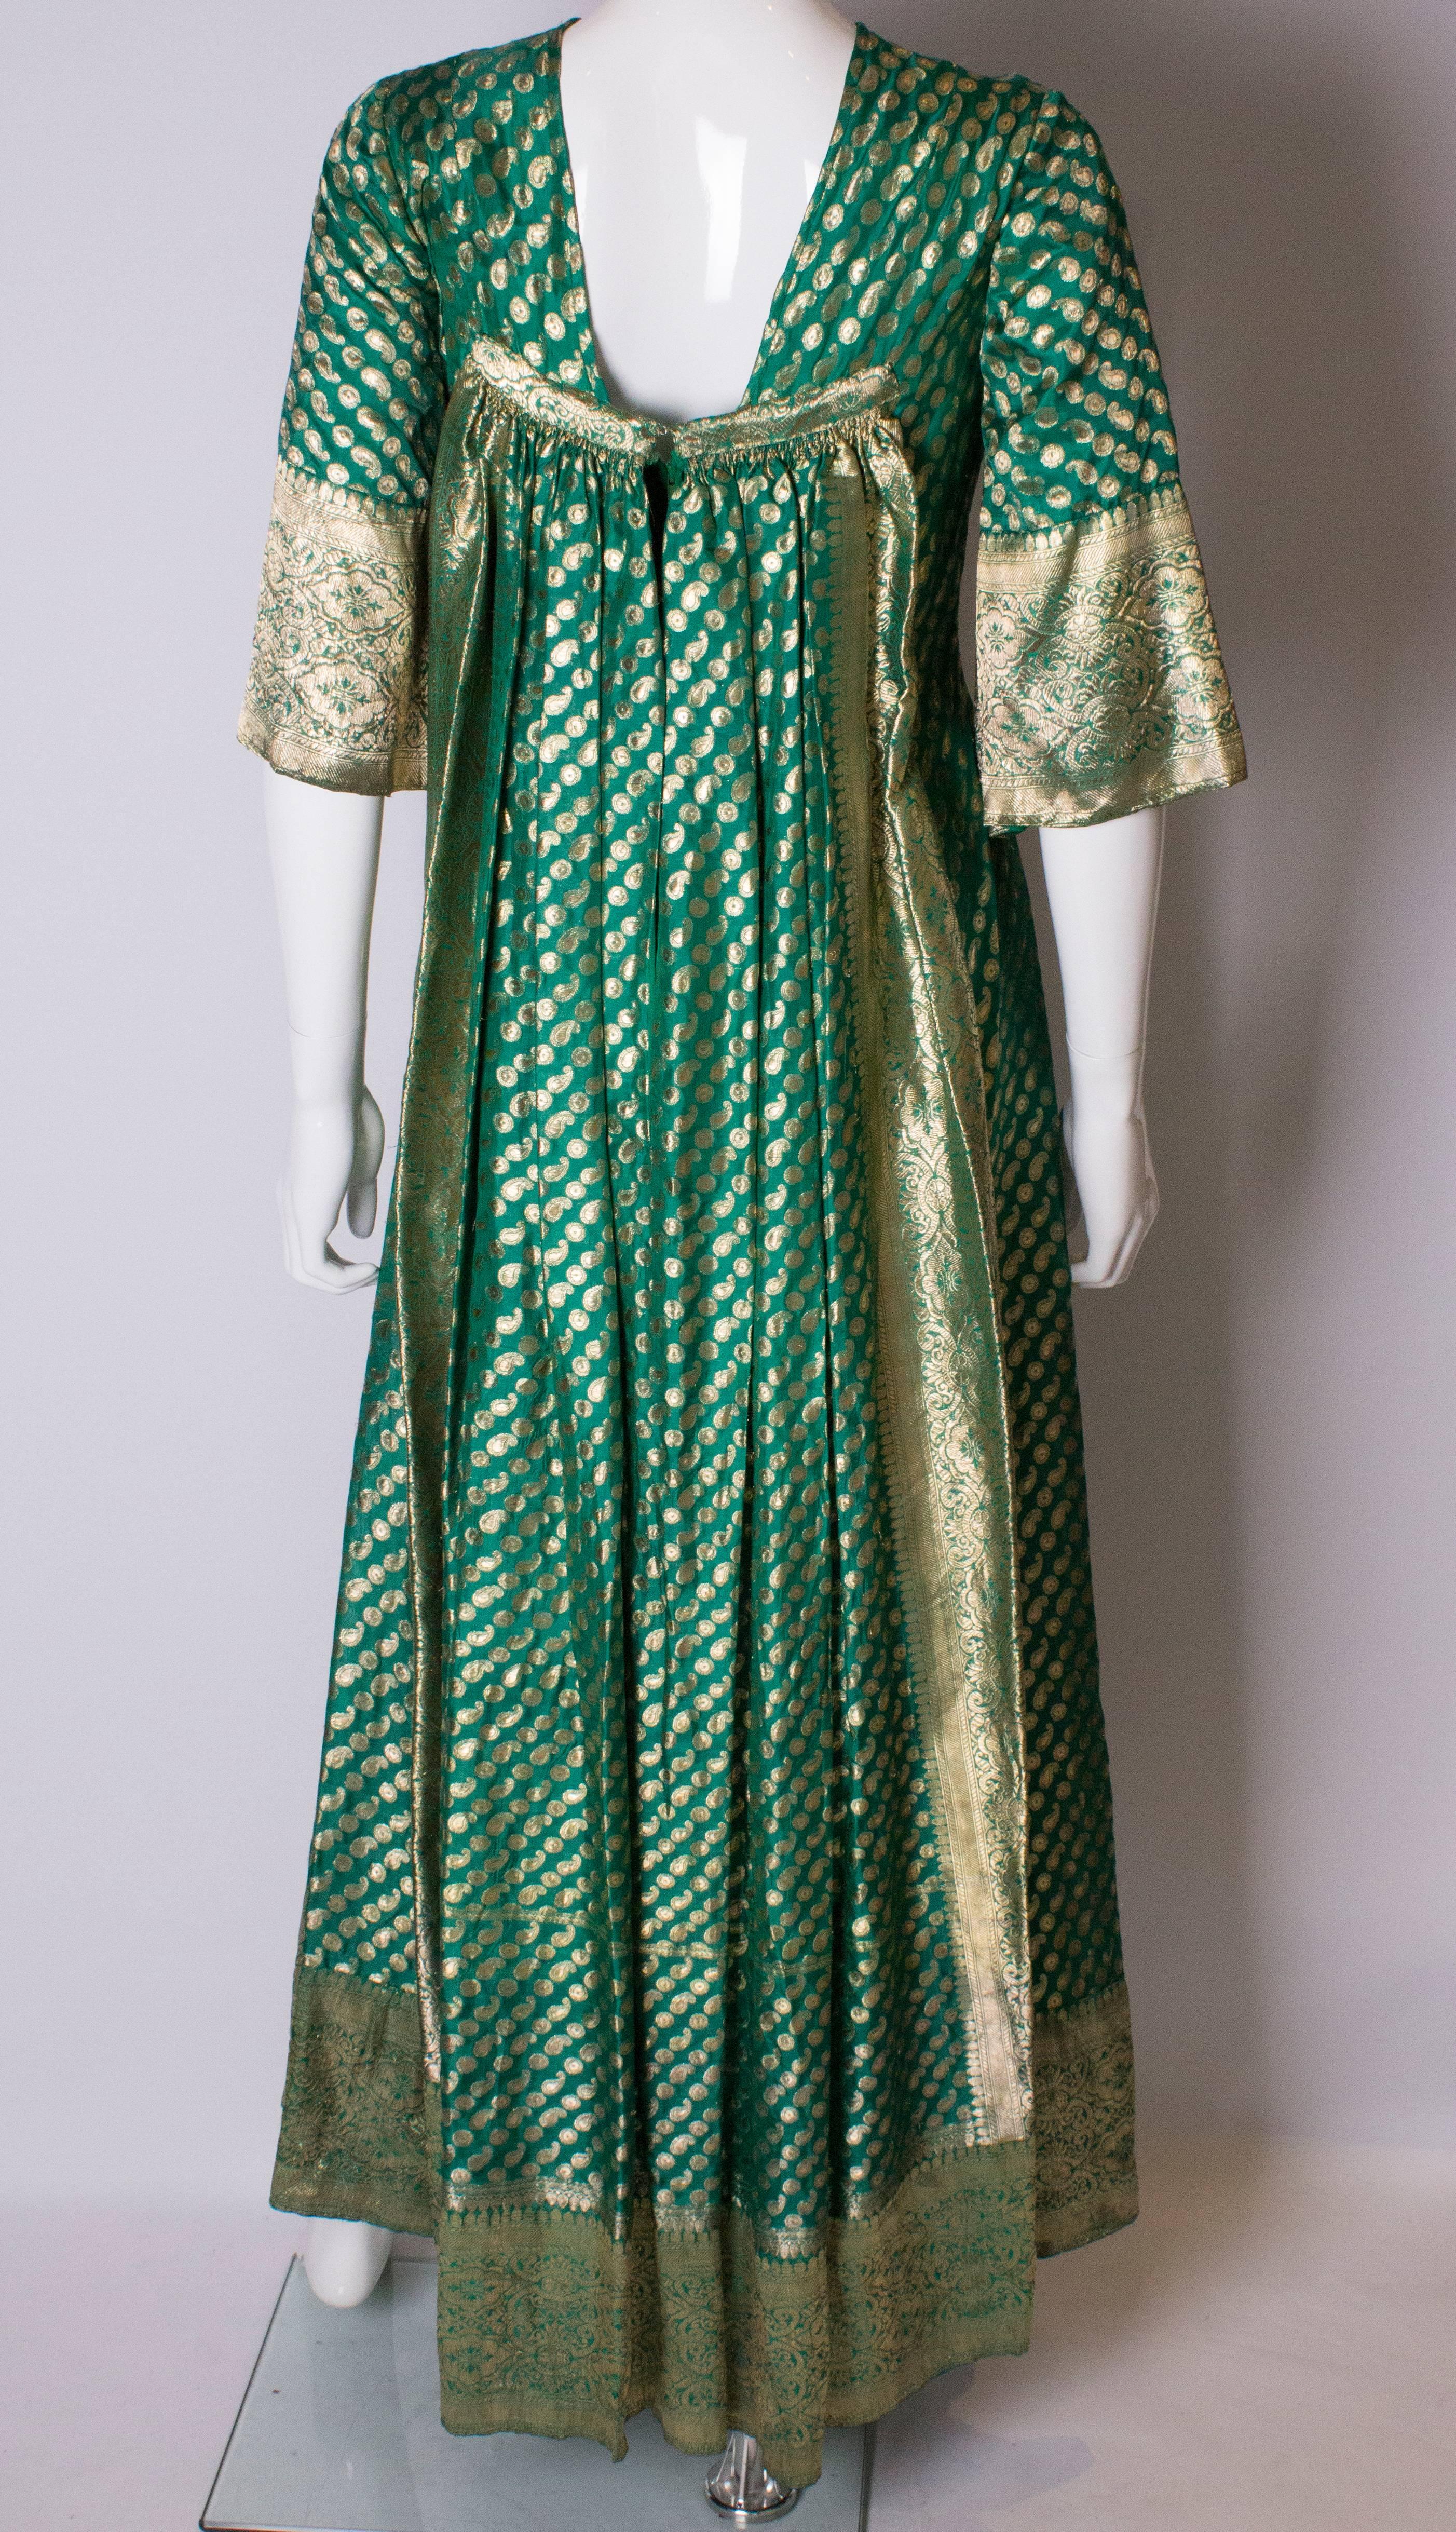 Women's or Men's Vintage Green and Gold Indian Dress